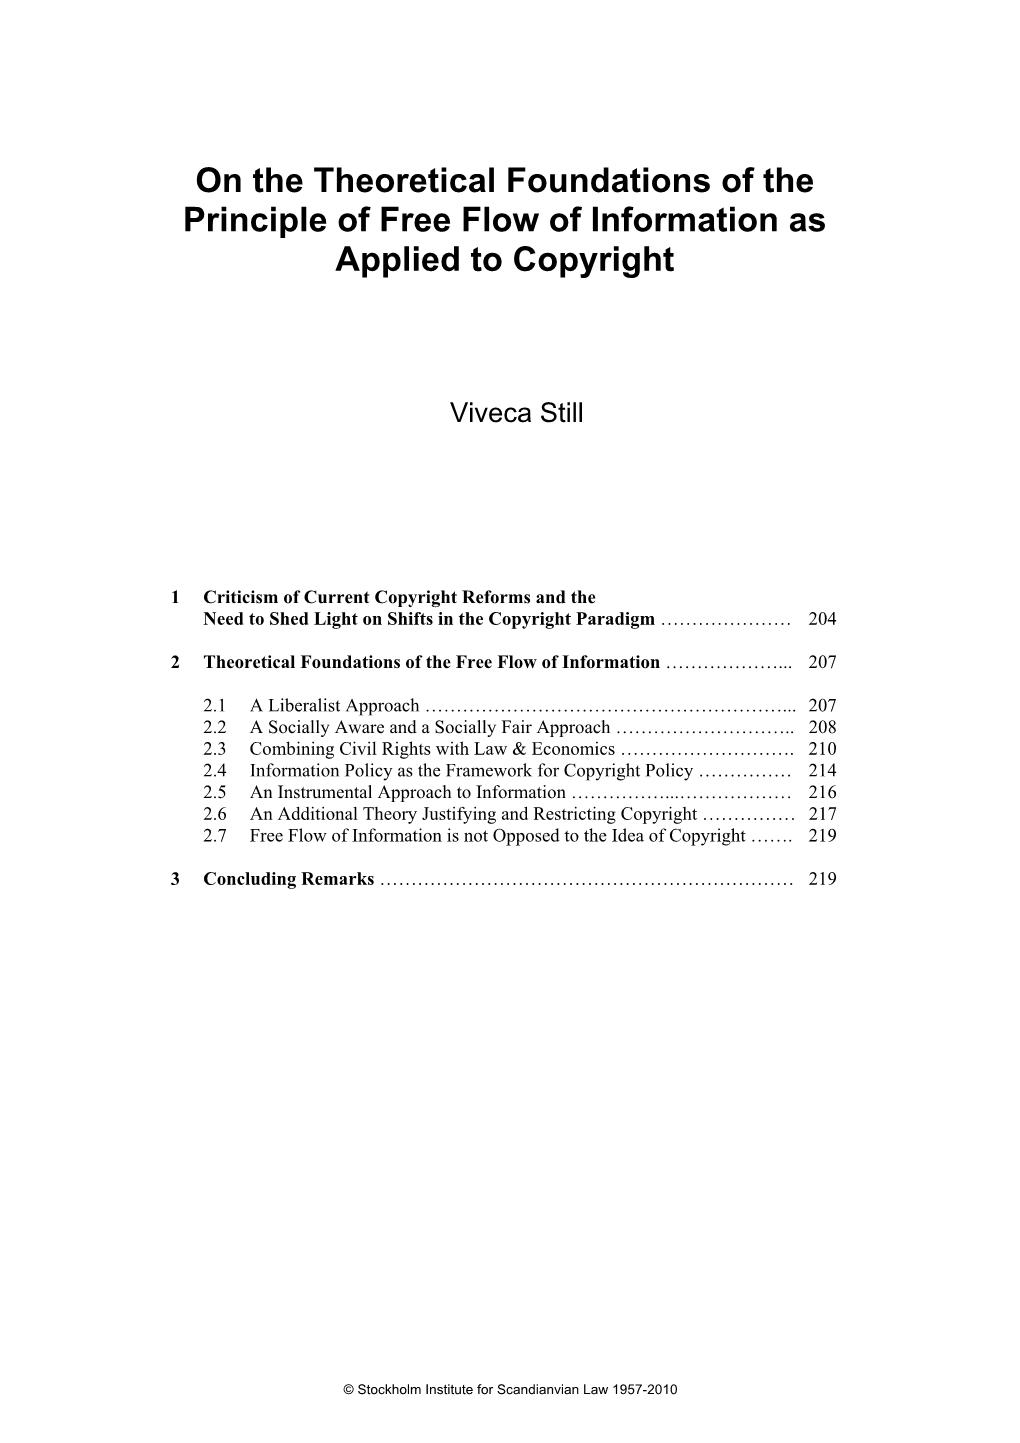 On the Theoretical Foundations of the Principle of Free Flow of Information As Applied to Copyright